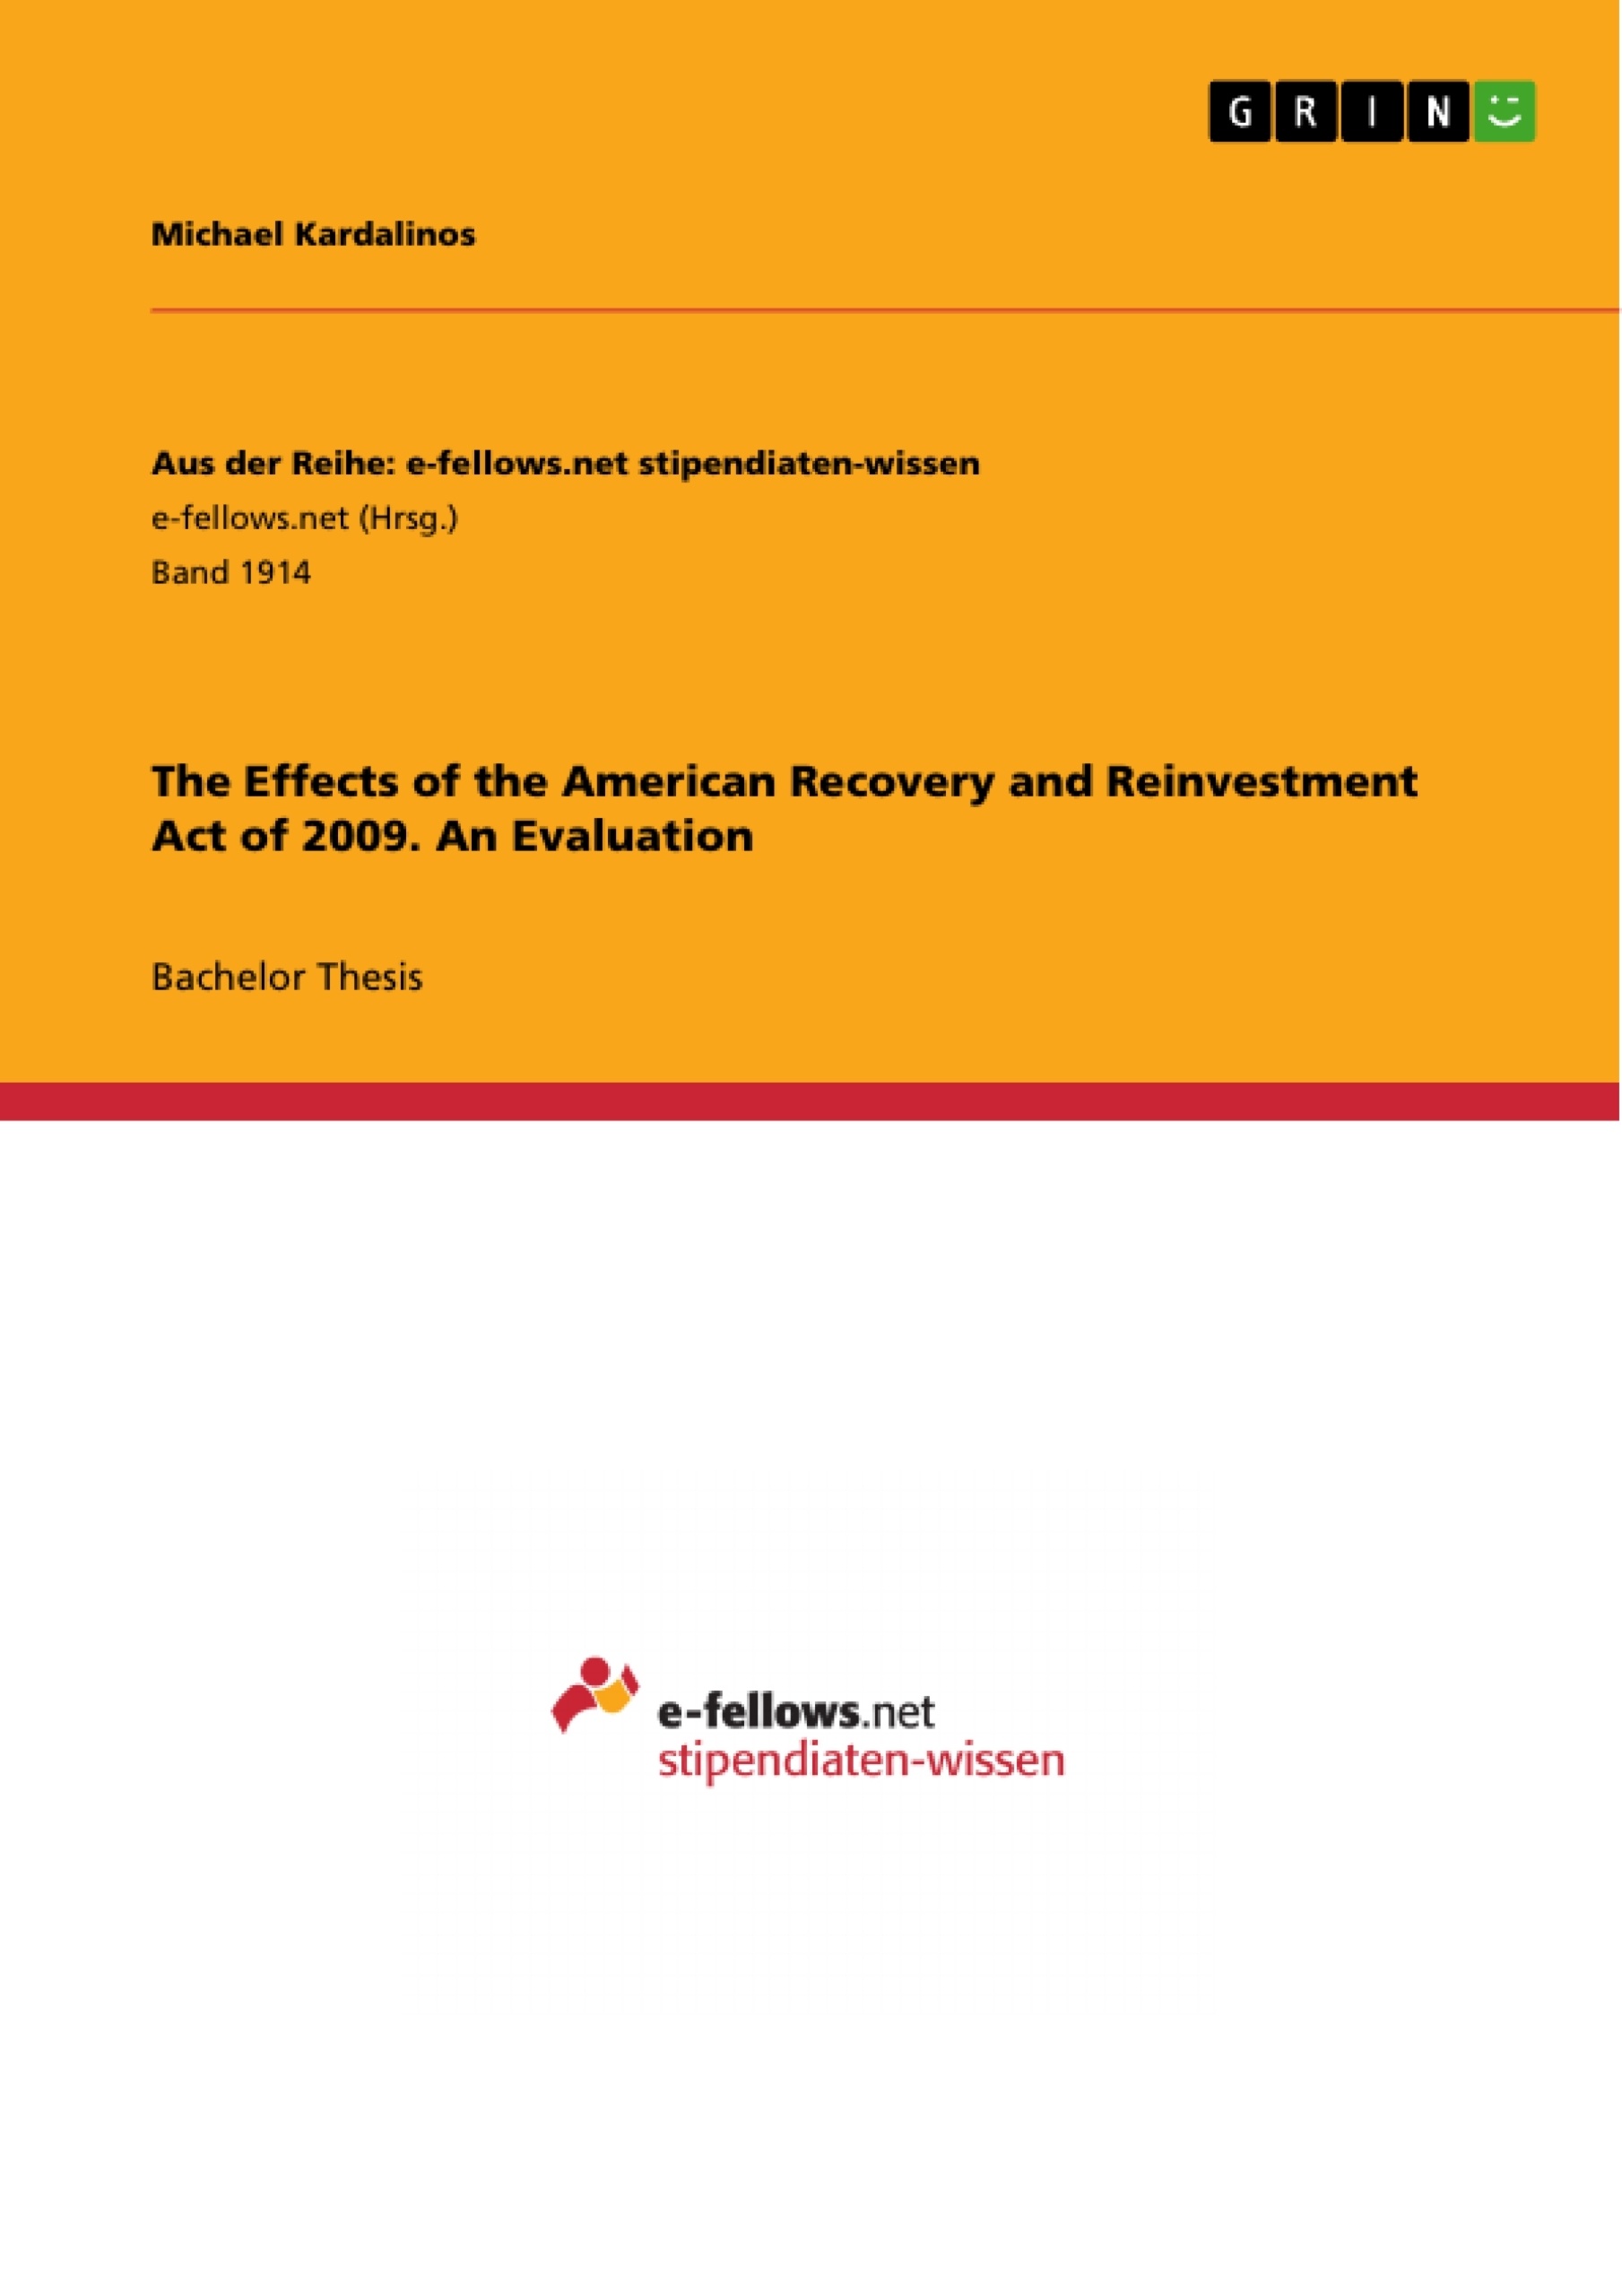 Título: The Effects of the American Recovery and Reinvestment Act of 2009. An Evaluation